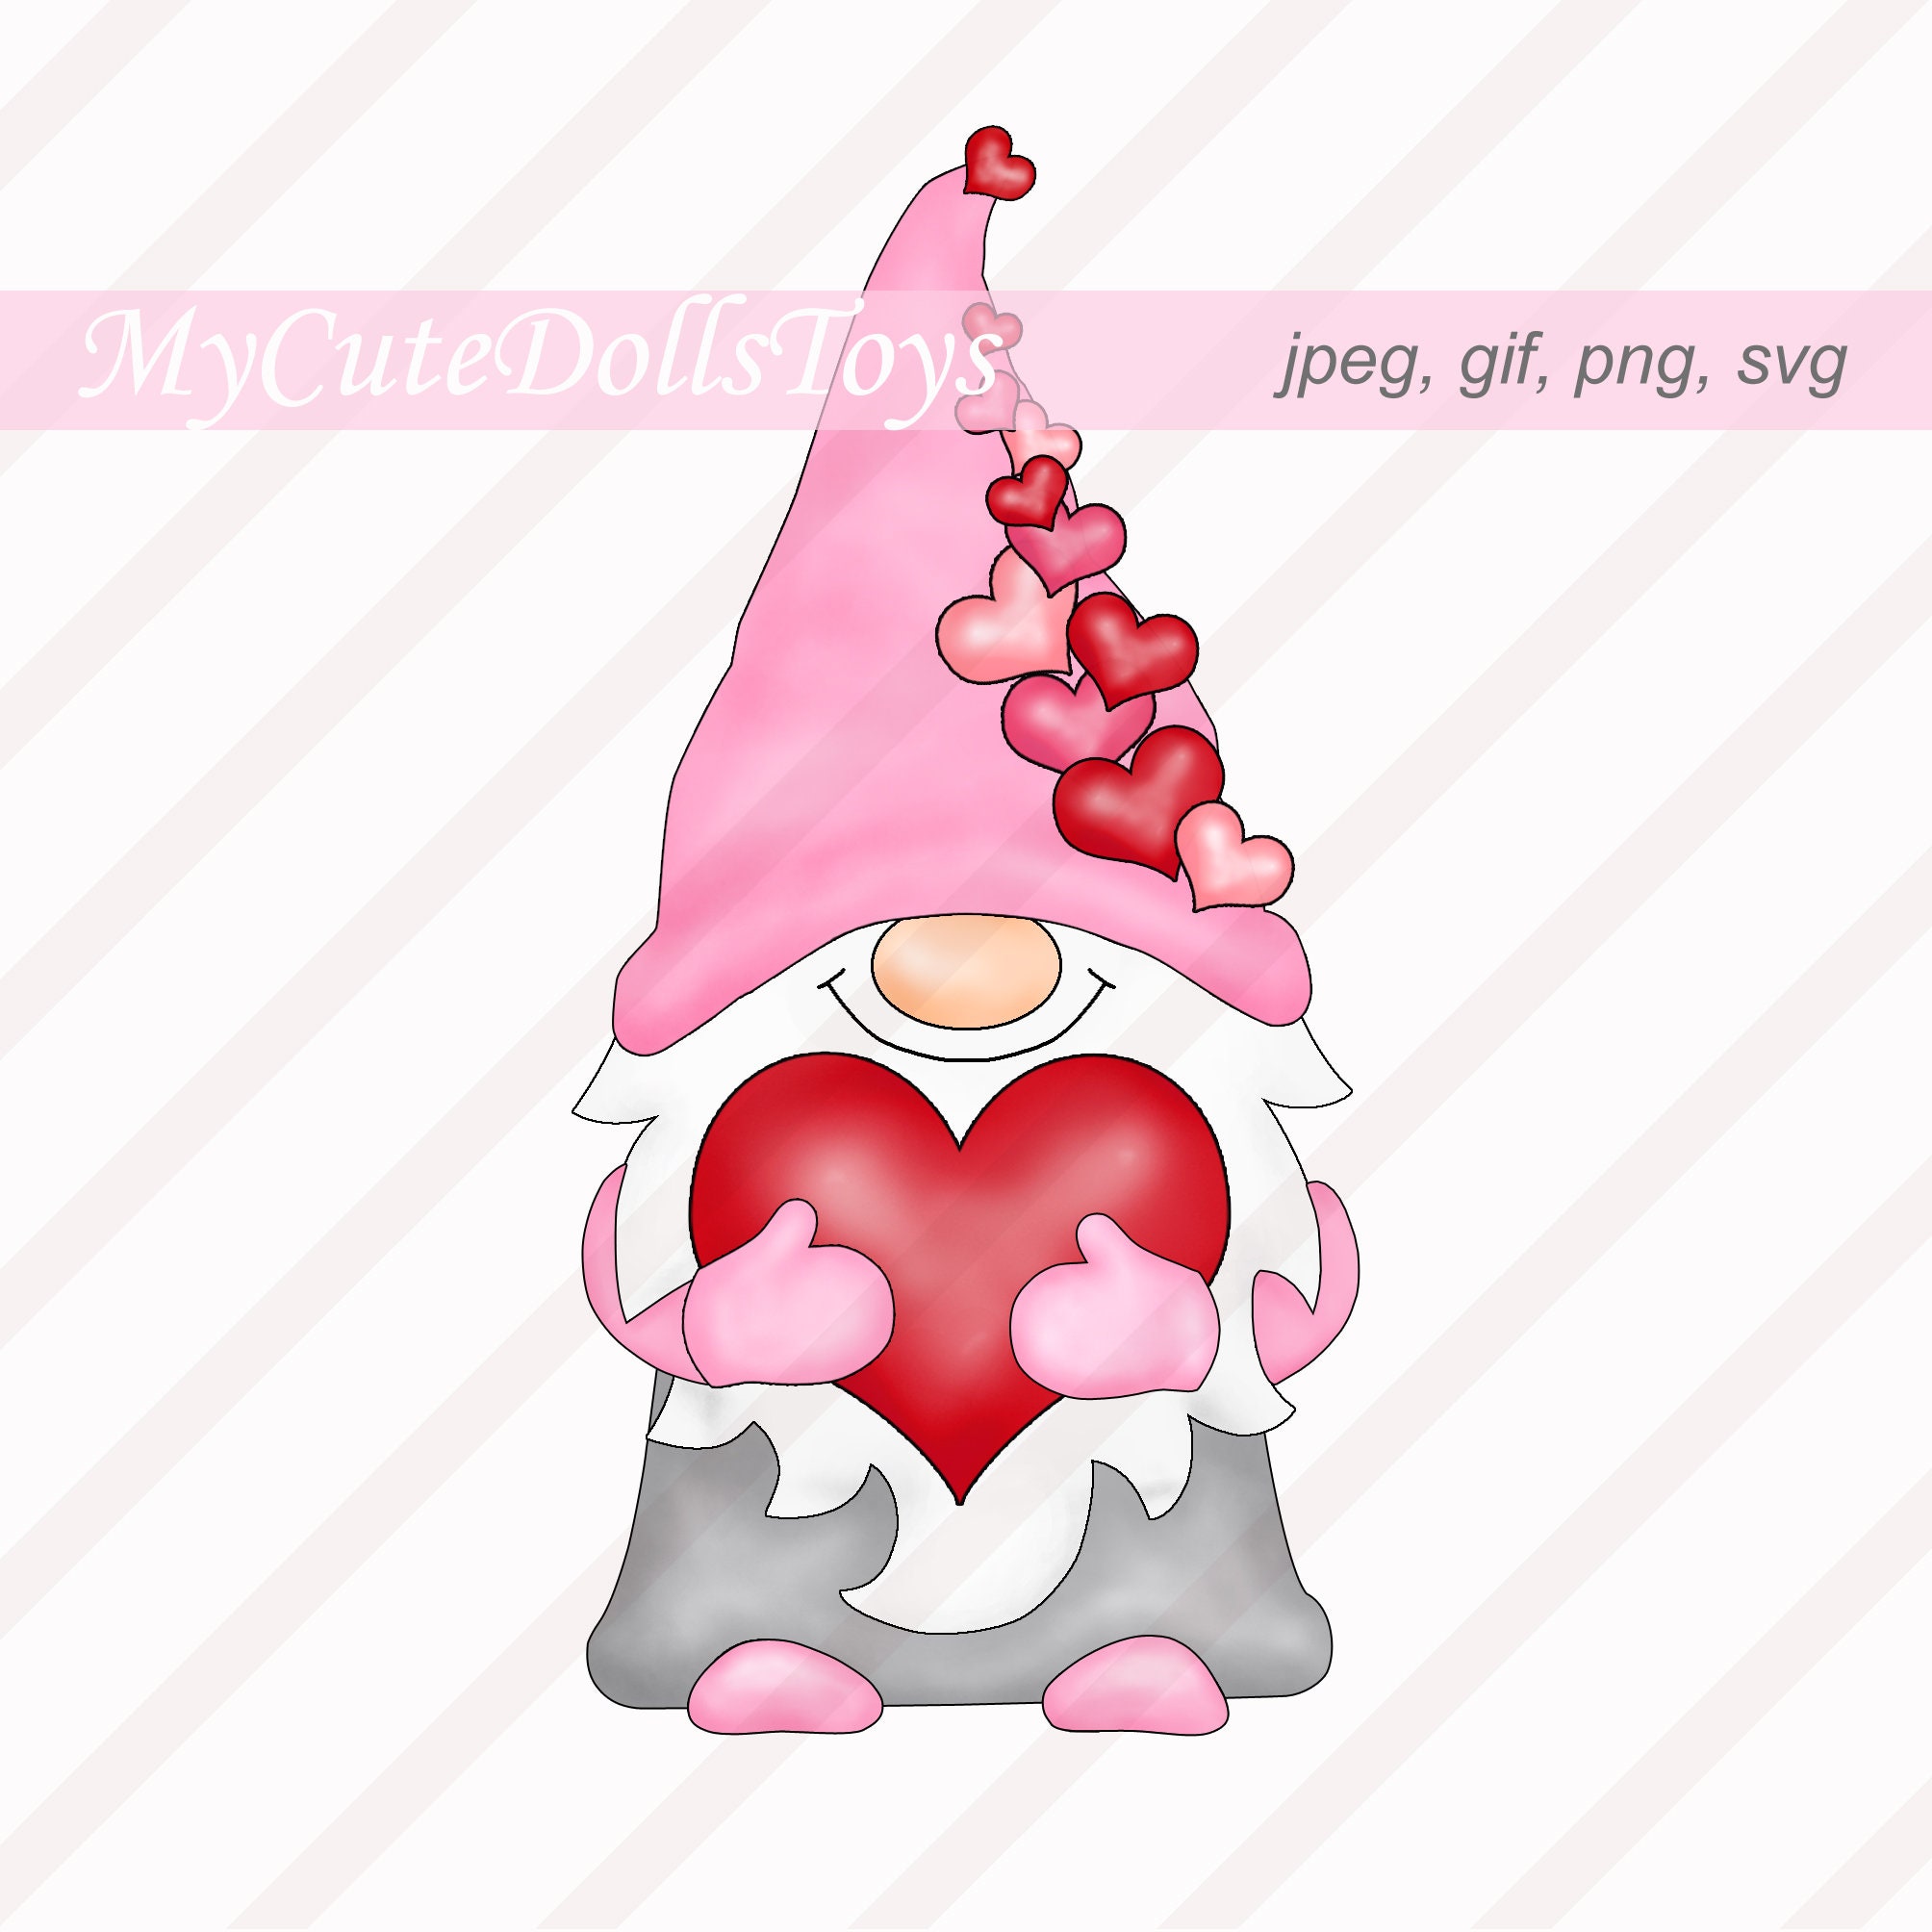 Mother's day gnome gift svg Mothers day knome card gift | Etsy